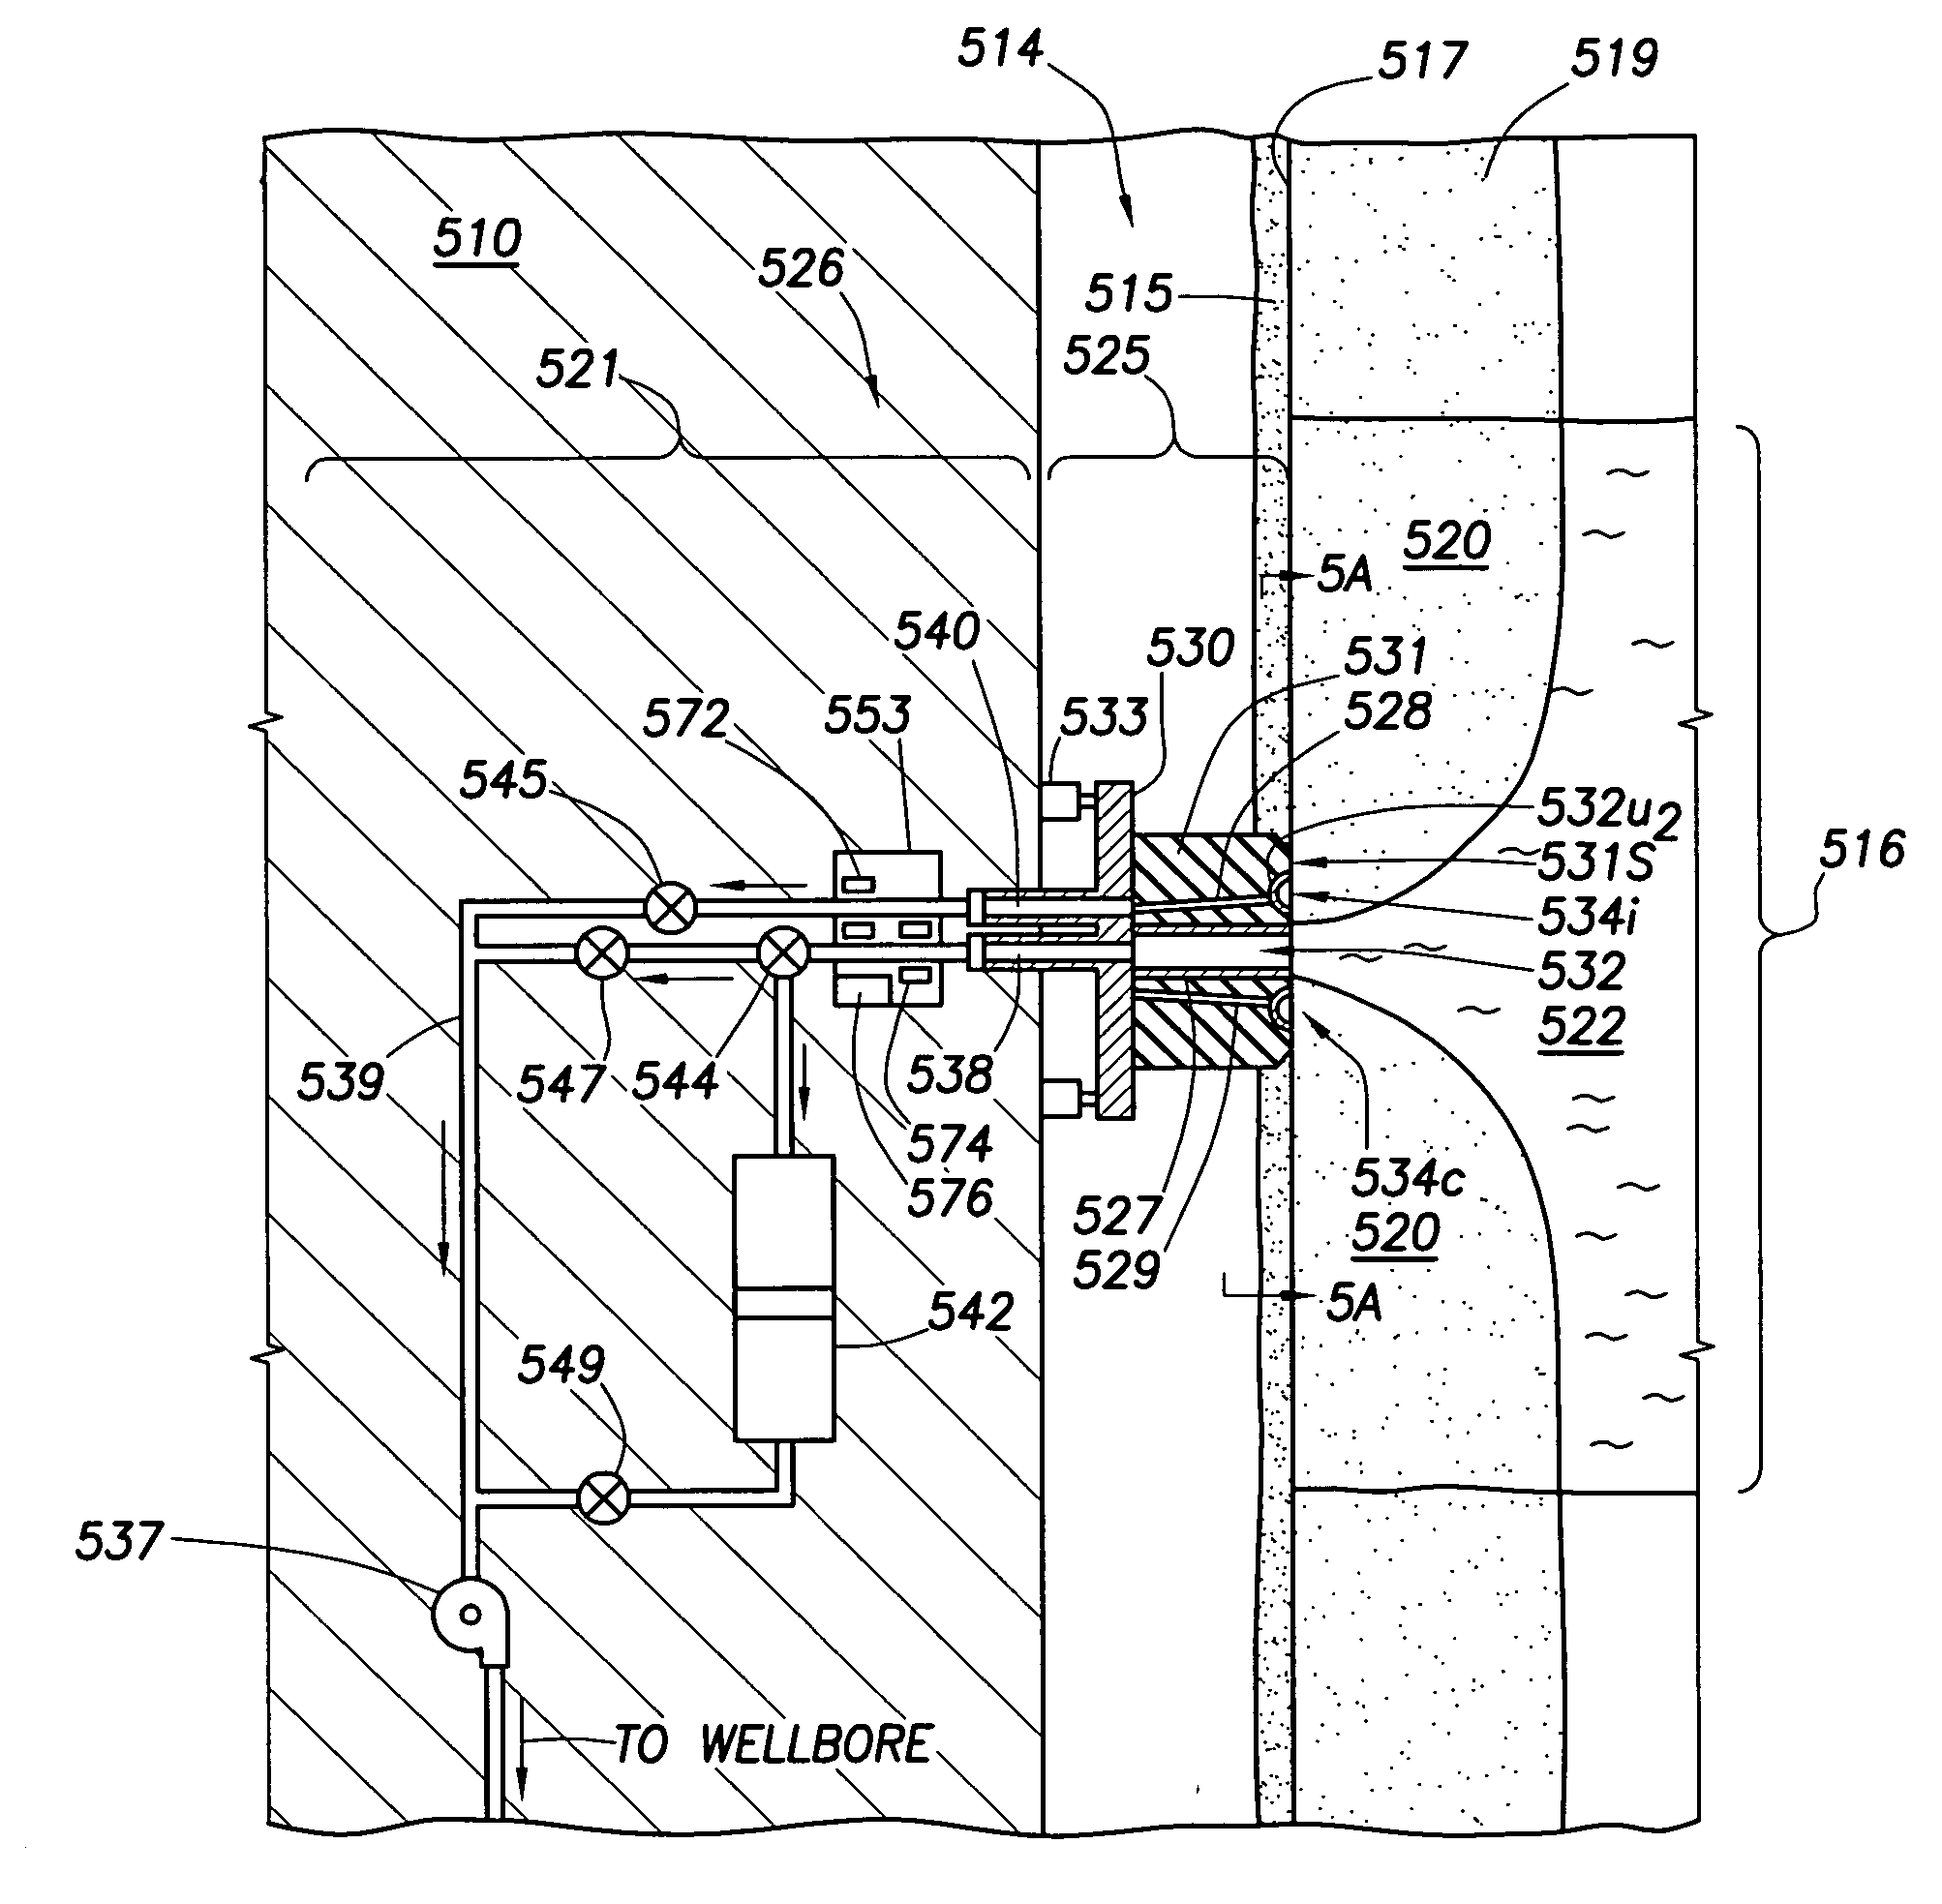 Apparatus and method for formation evaluation